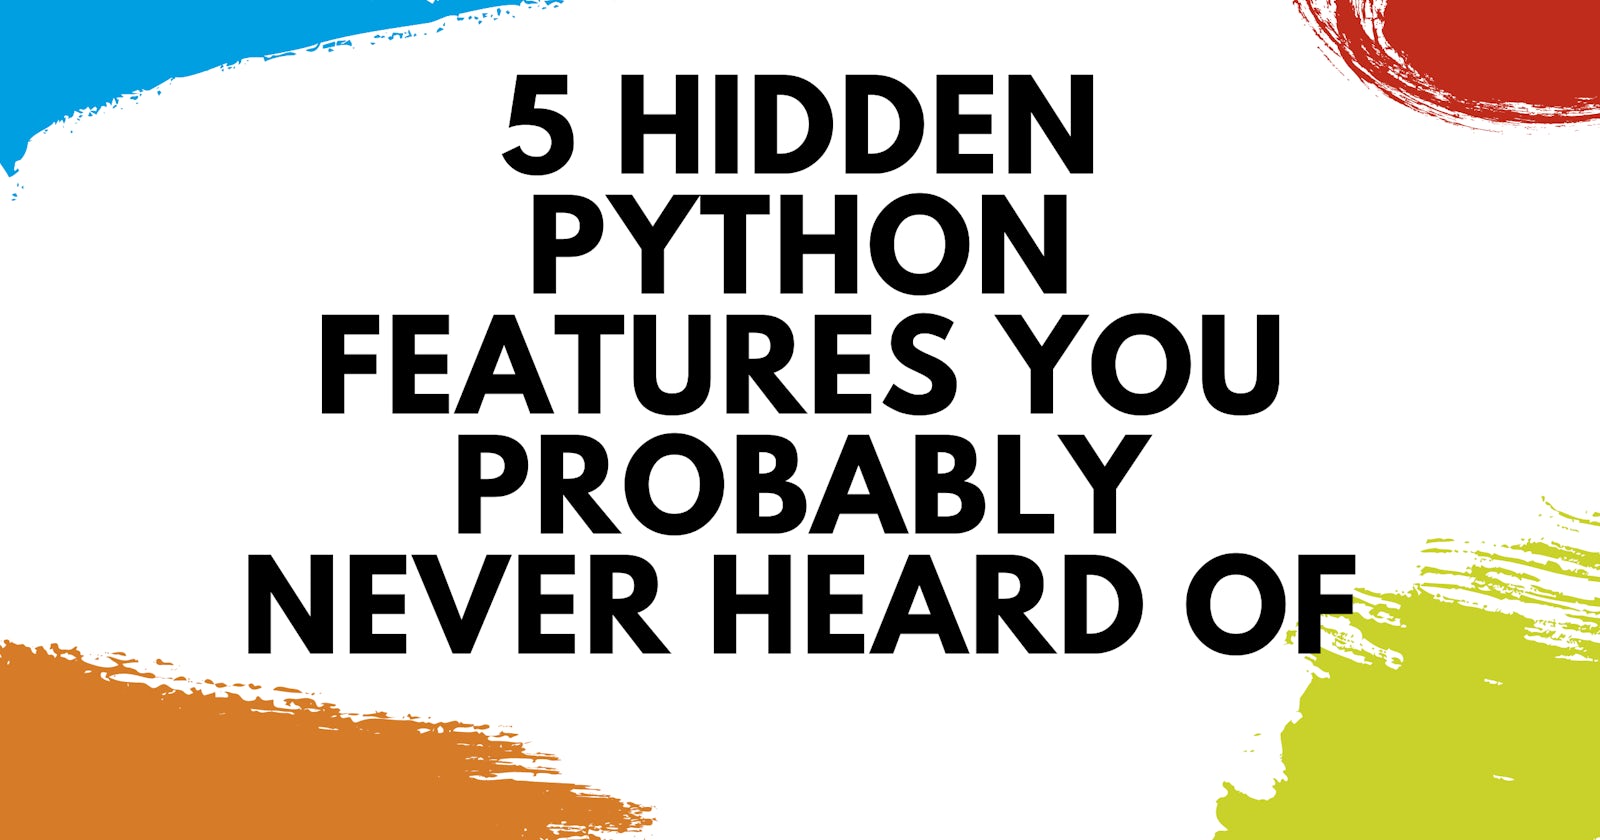 5 Hidden Python Features You Probably Never Heard Of